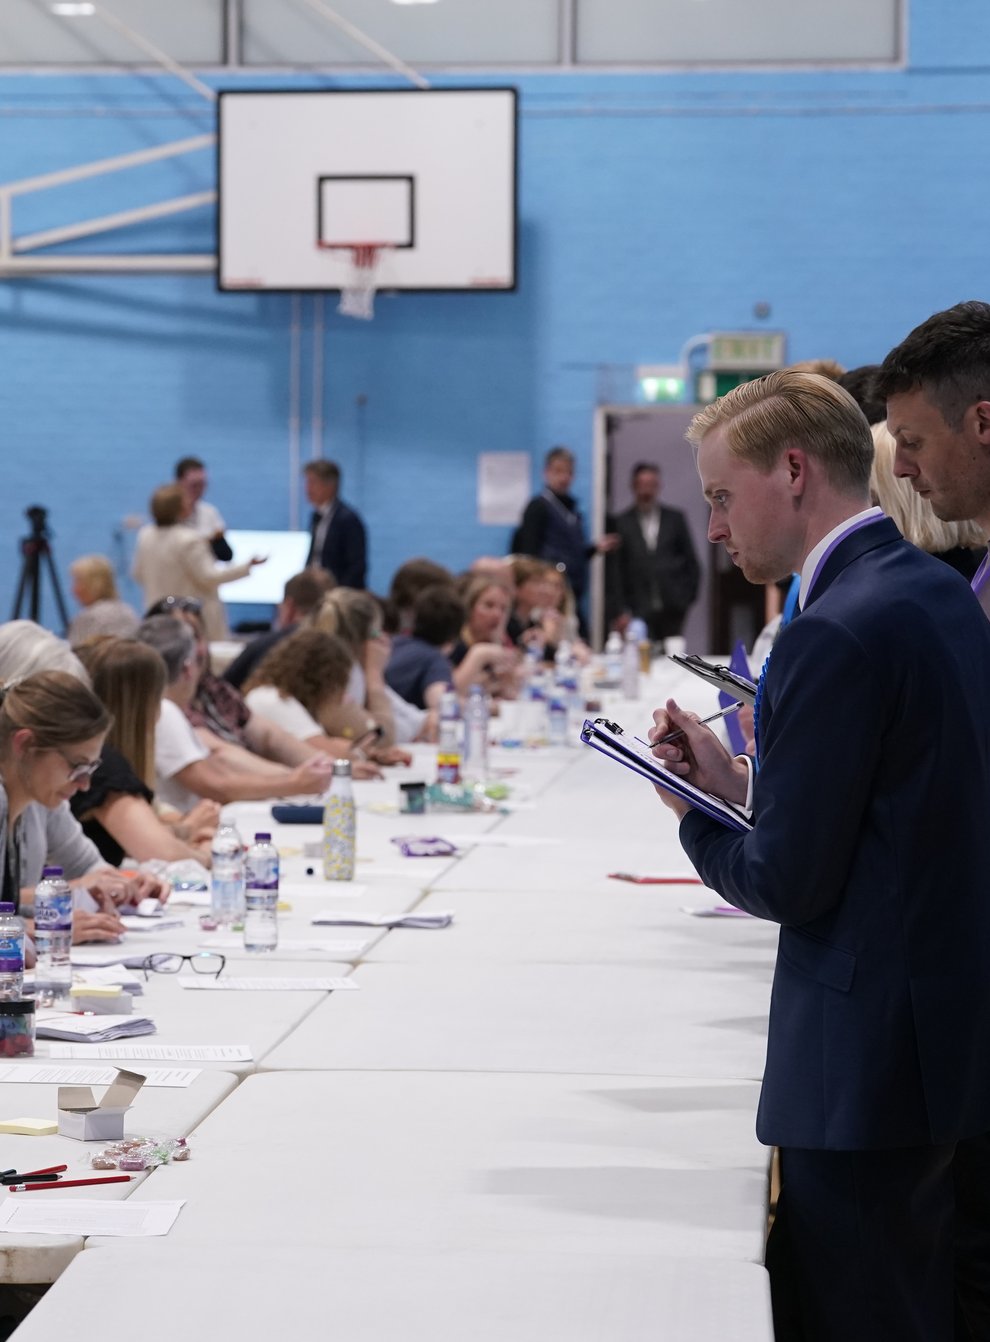 Postal votes are counted at the Lords Meadow Leisure Centre, in Crediton, Devon, for the Tiverton and Honiton by-election, which was triggered by the resignation of MP Neil Parish for watching pornography in the Commons. Picture date: Thursday June 23, 2022.